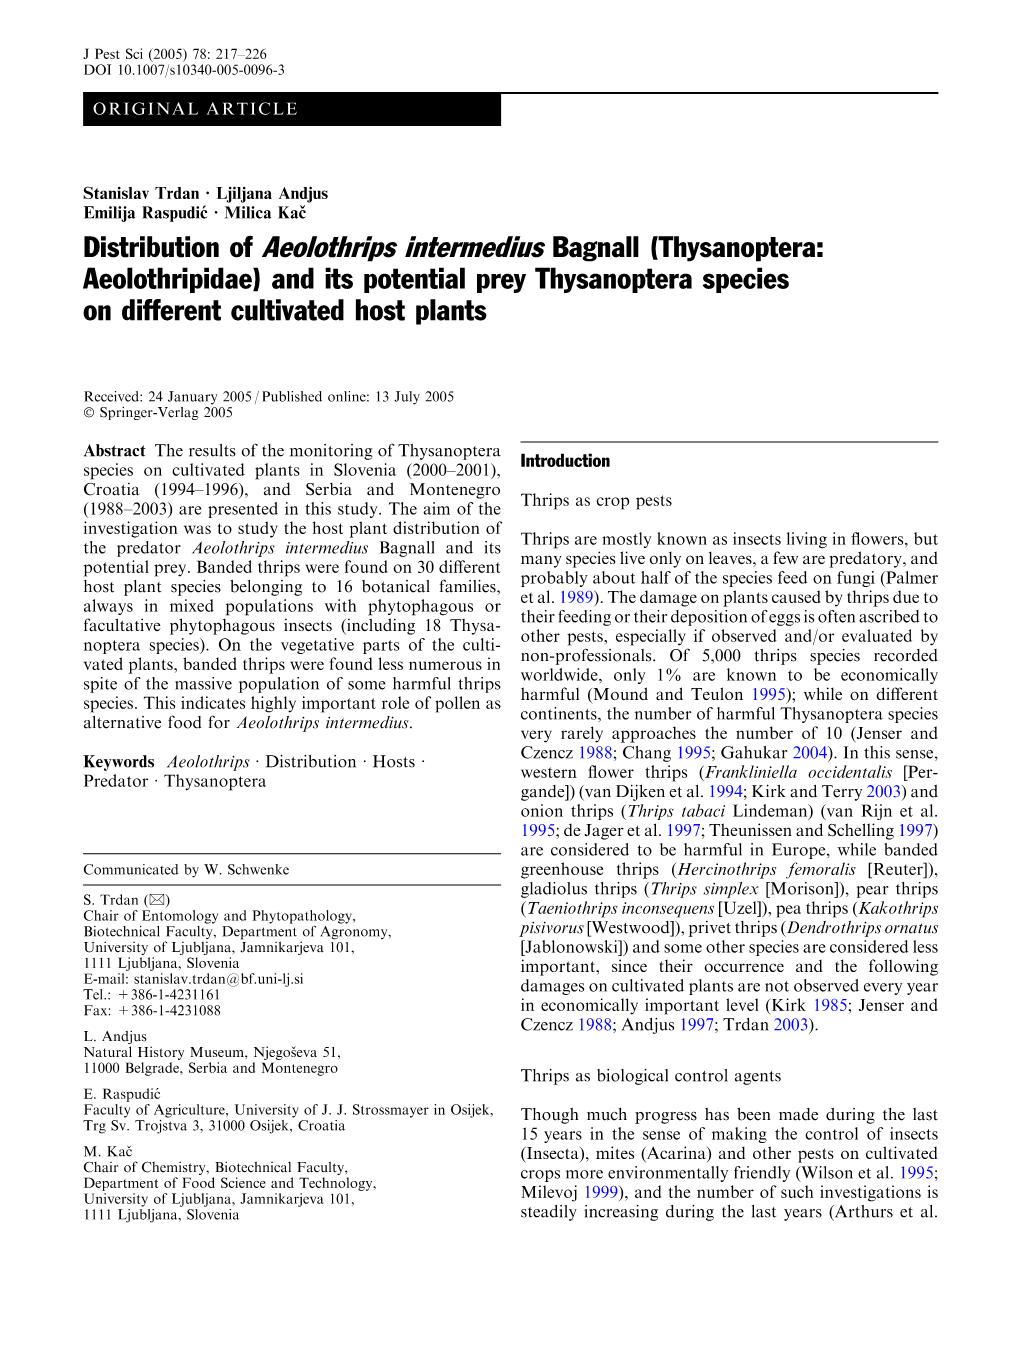 Distribution of Aeolothrips Intermedius Bagnall (Thysanoptera: Aeolothripidae) and Its Potential Prey Thysanoptera Species on Different Cultivated Host Plants